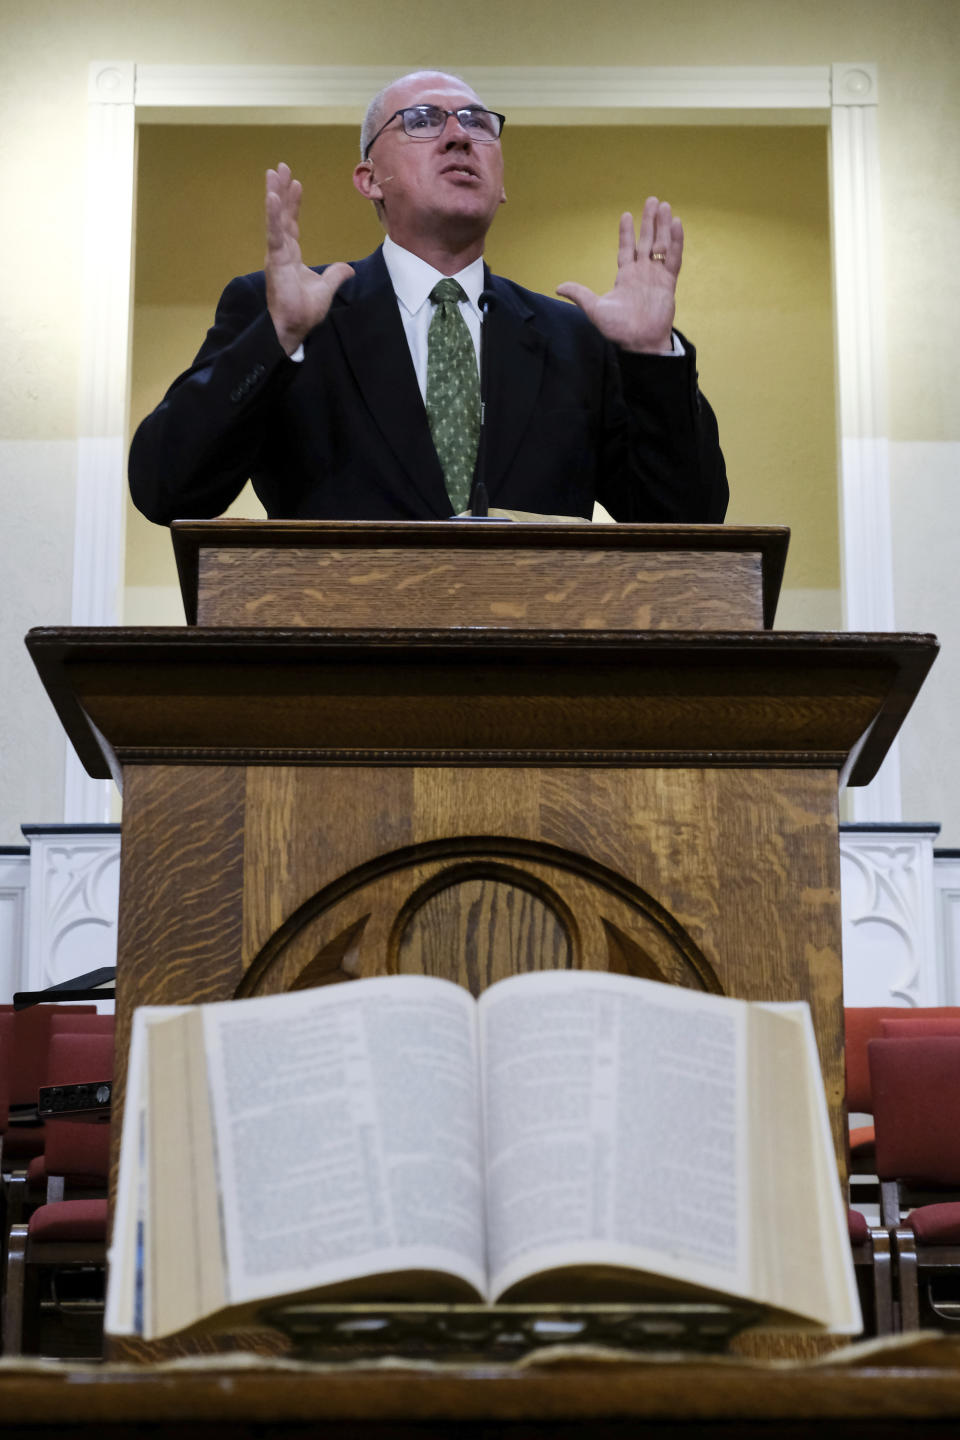 A Bible rests open on a table in front of the pulpit as Bart Barber preaches to members of the First Baptist Church of Farmersville, Texas, on Sunday, Sept. 25, 2022. After recently appointing an sexual abuse task force that will make recommendations at next year’s annual meeting in New Orleans, he said Southern Baptists are determined that there must be reforms and identifying solutions to the problem is his top priority. (AP Photo/Audrey Jackson)